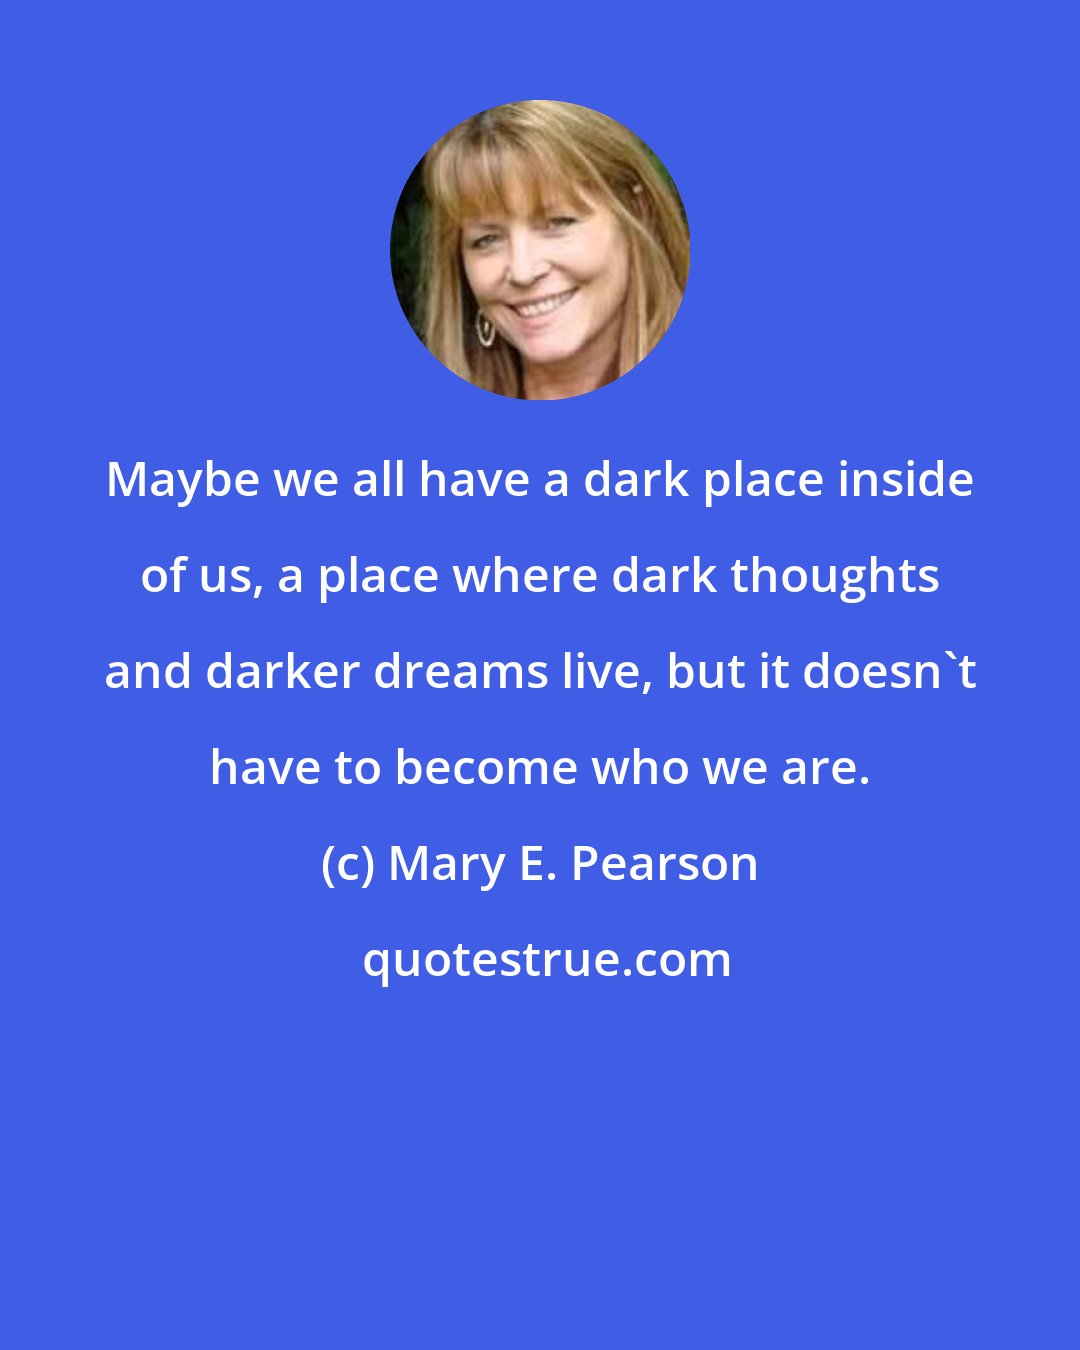 Mary E. Pearson: Maybe we all have a dark place inside of us, a place where dark thoughts and darker dreams live, but it doesn't have to become who we are.